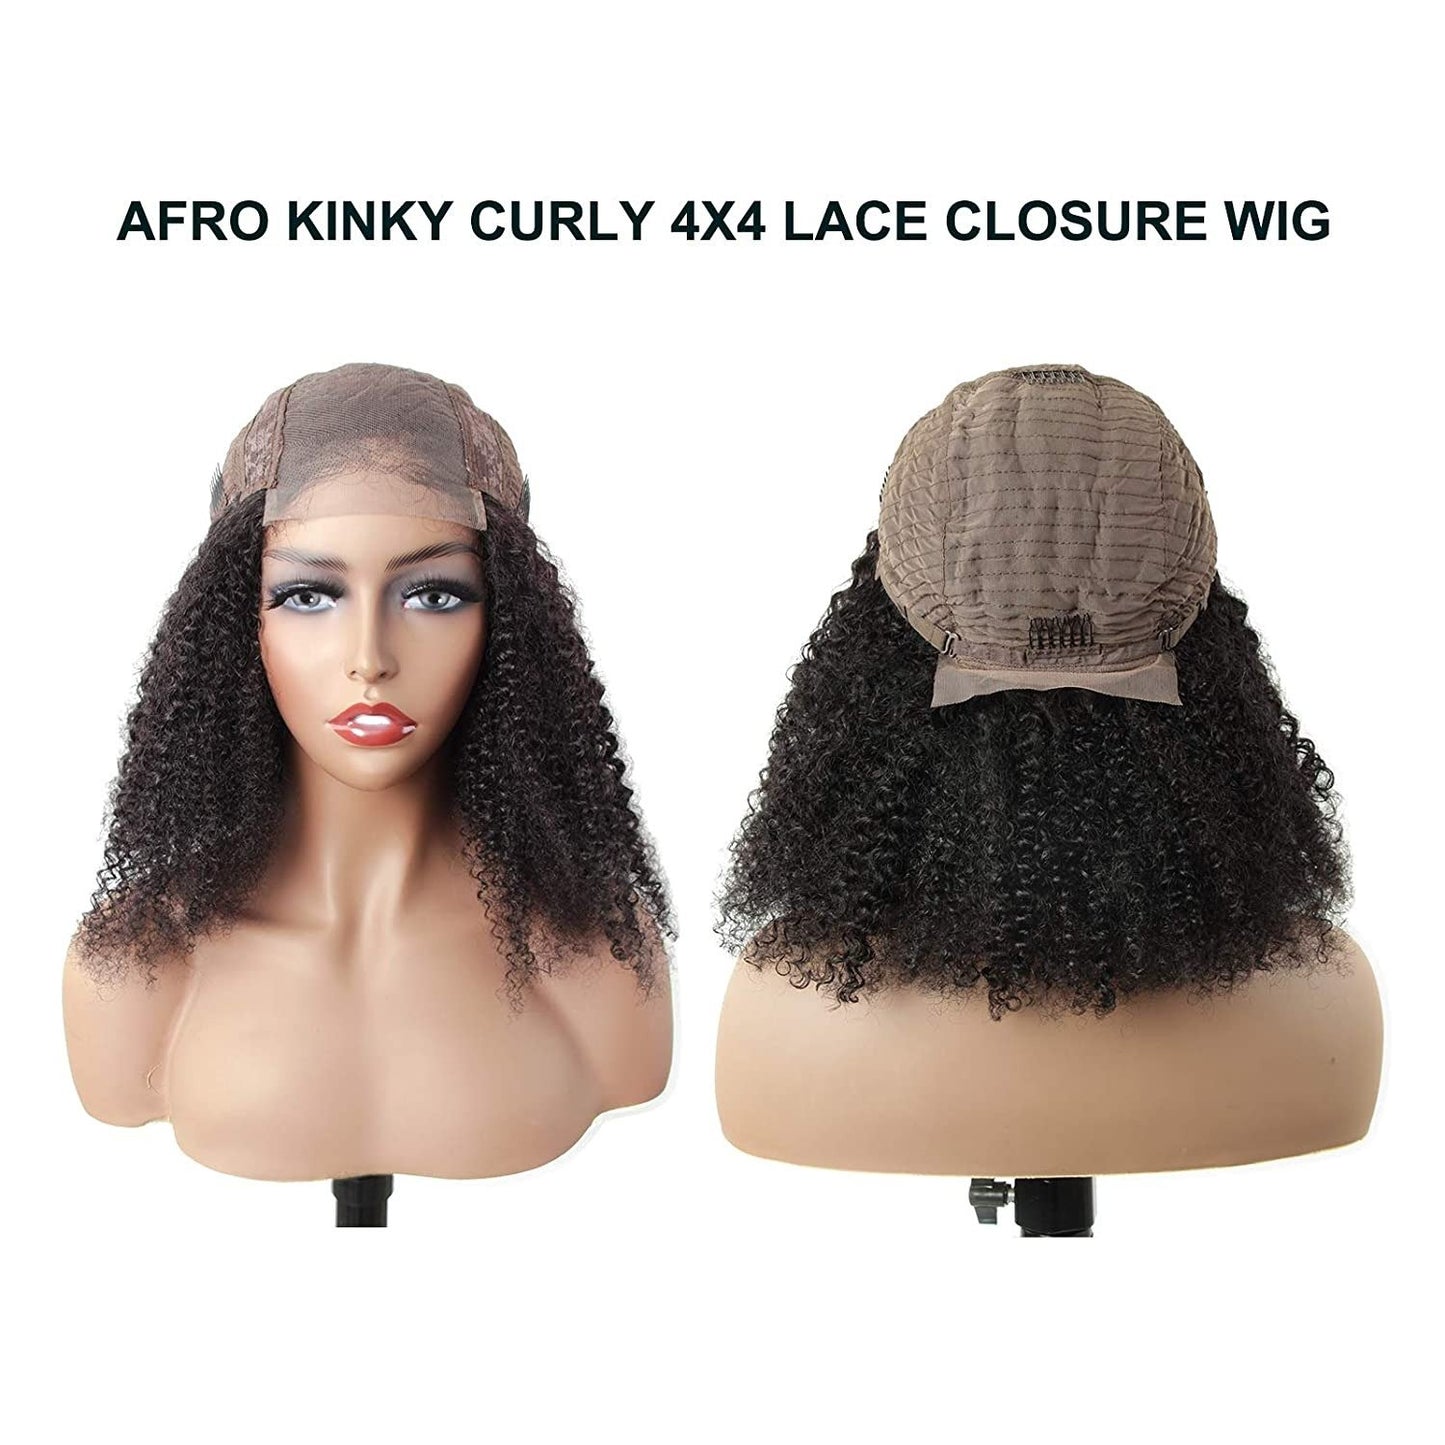 BeuMax 4x4 Afro Kinky Curly 5x5 Lace Closure wig 6x6 Human Hair Wigs